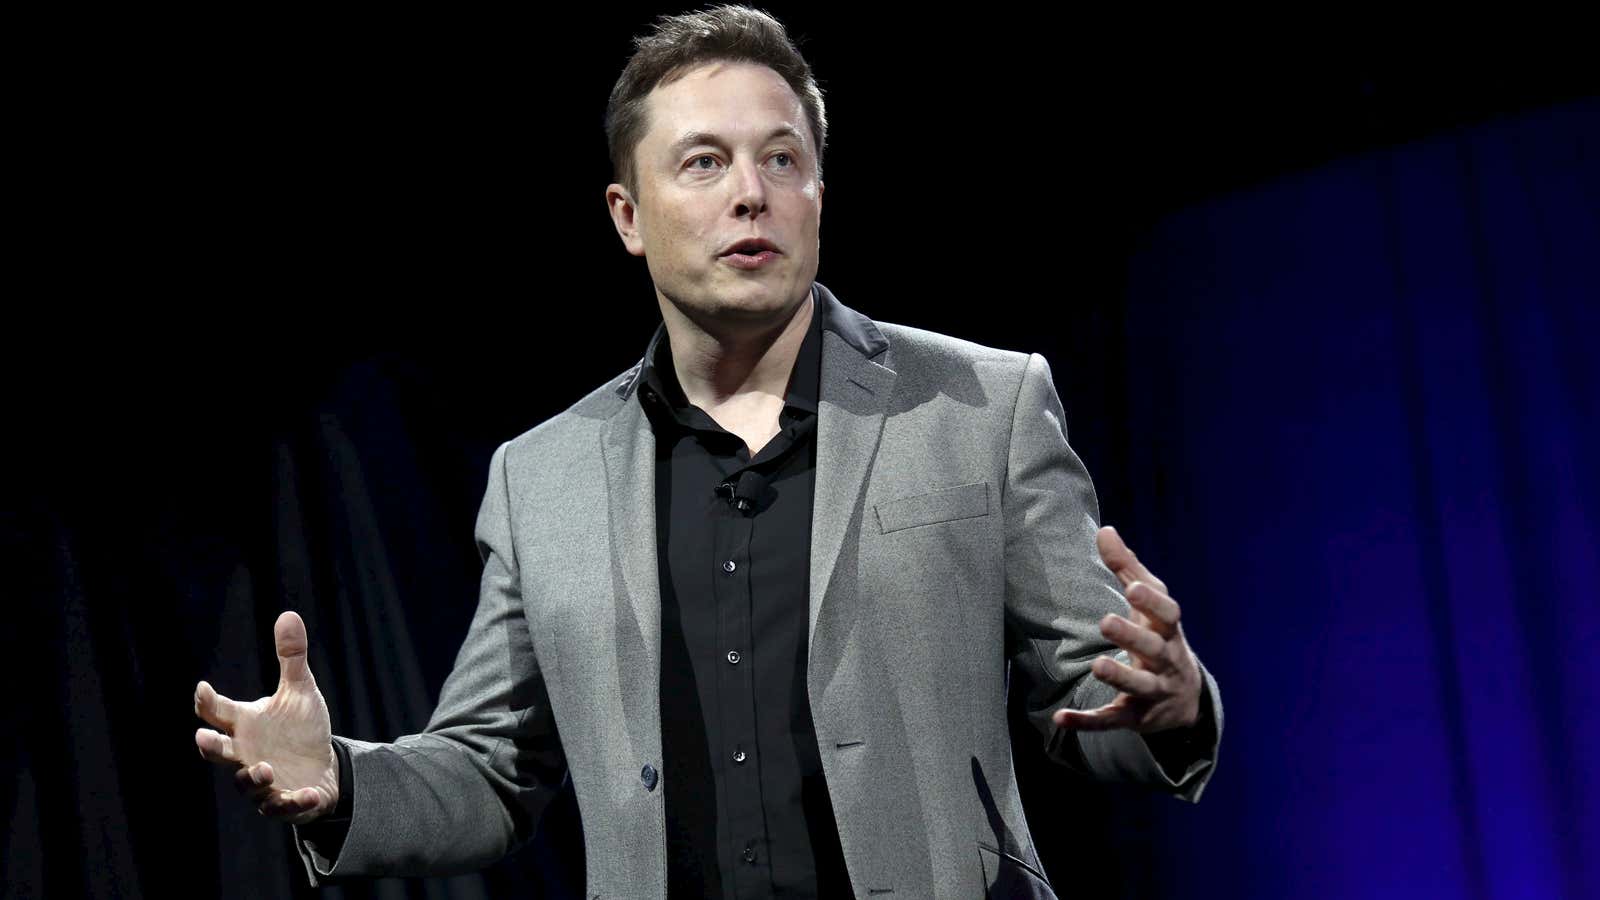 Yes, Elon, big battery leaps are possible.